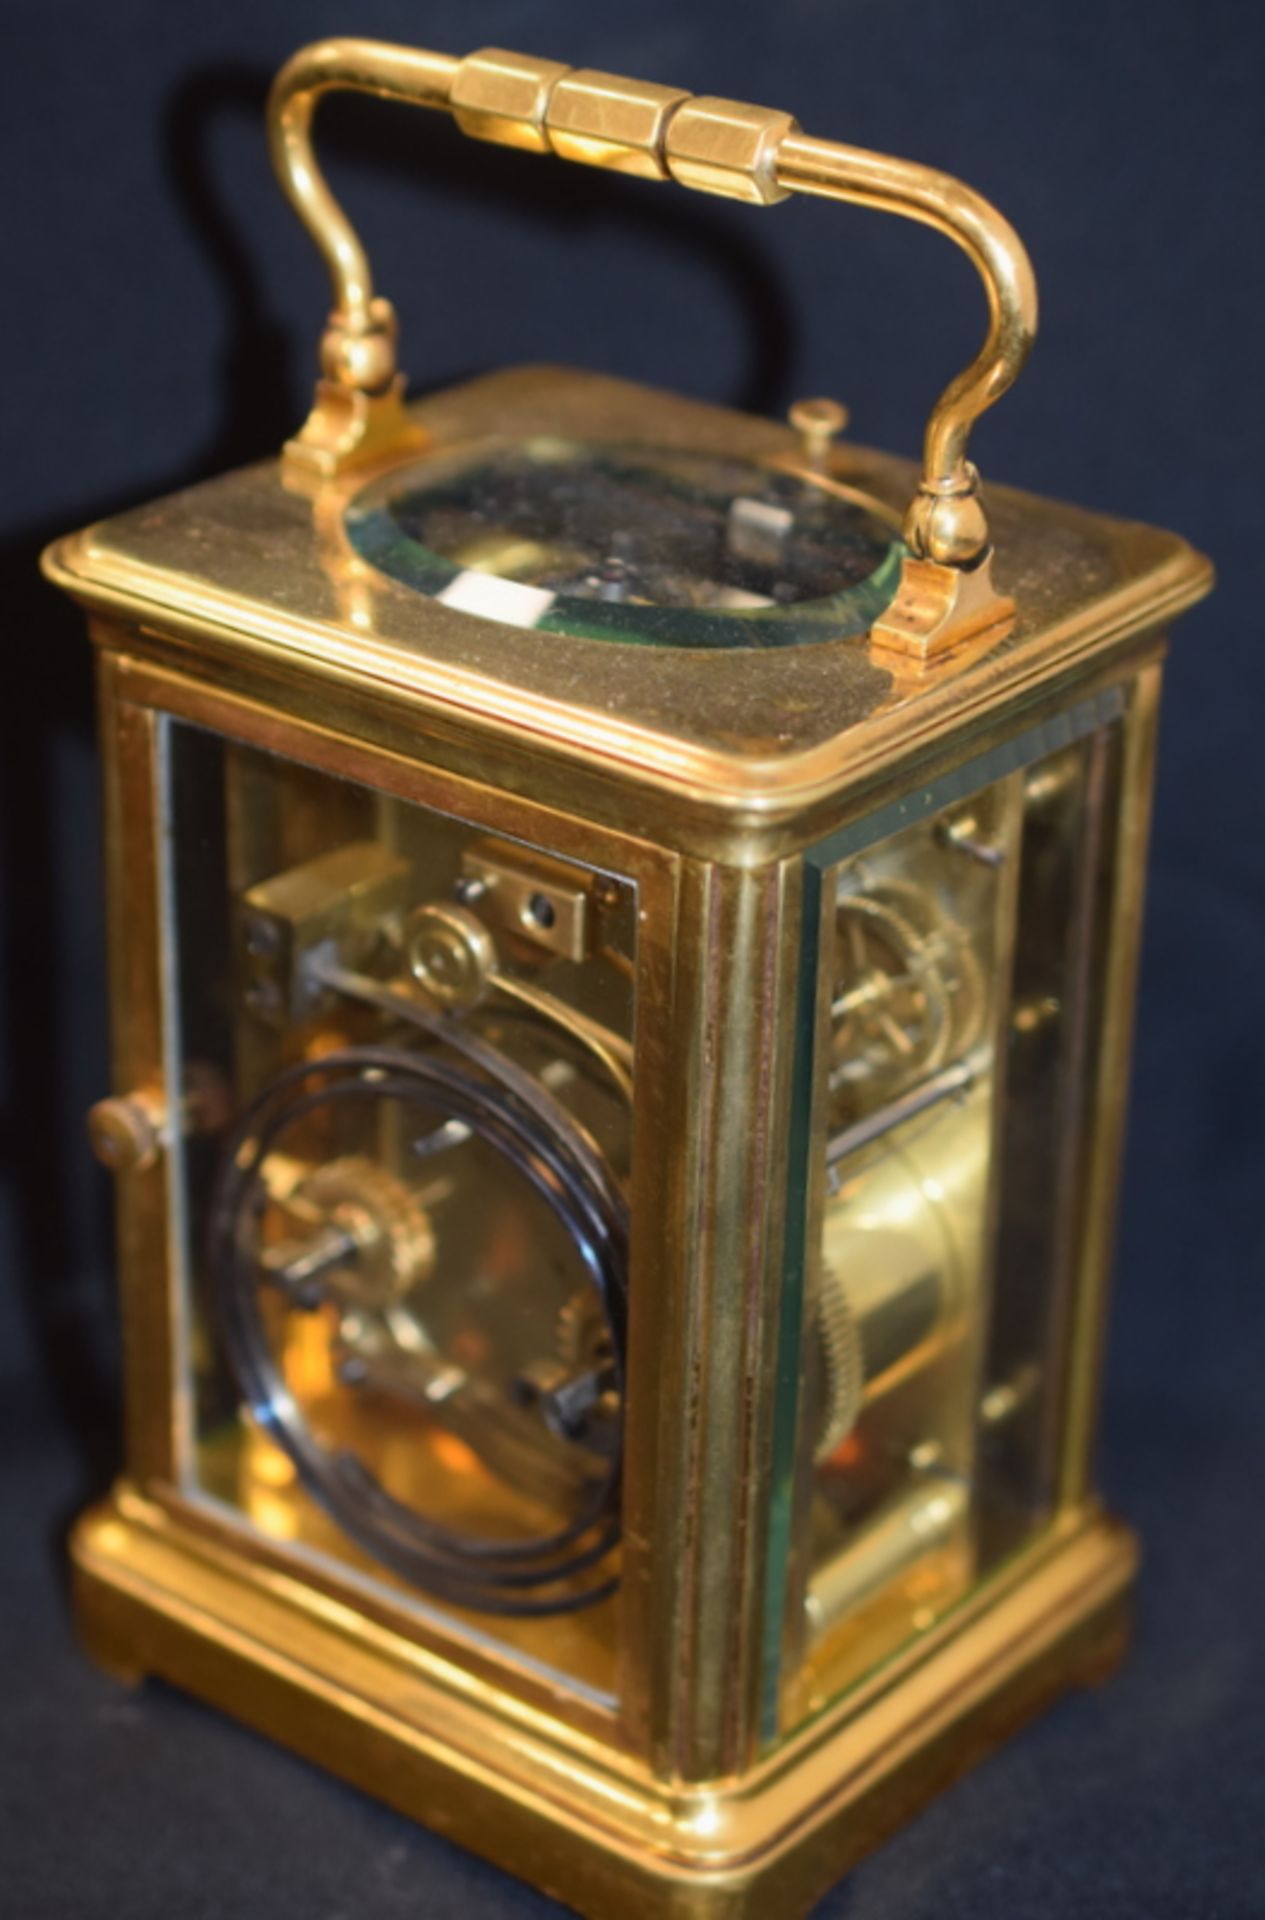 Excellent French Brass Repeater Carriage Clock - Image 5 of 6